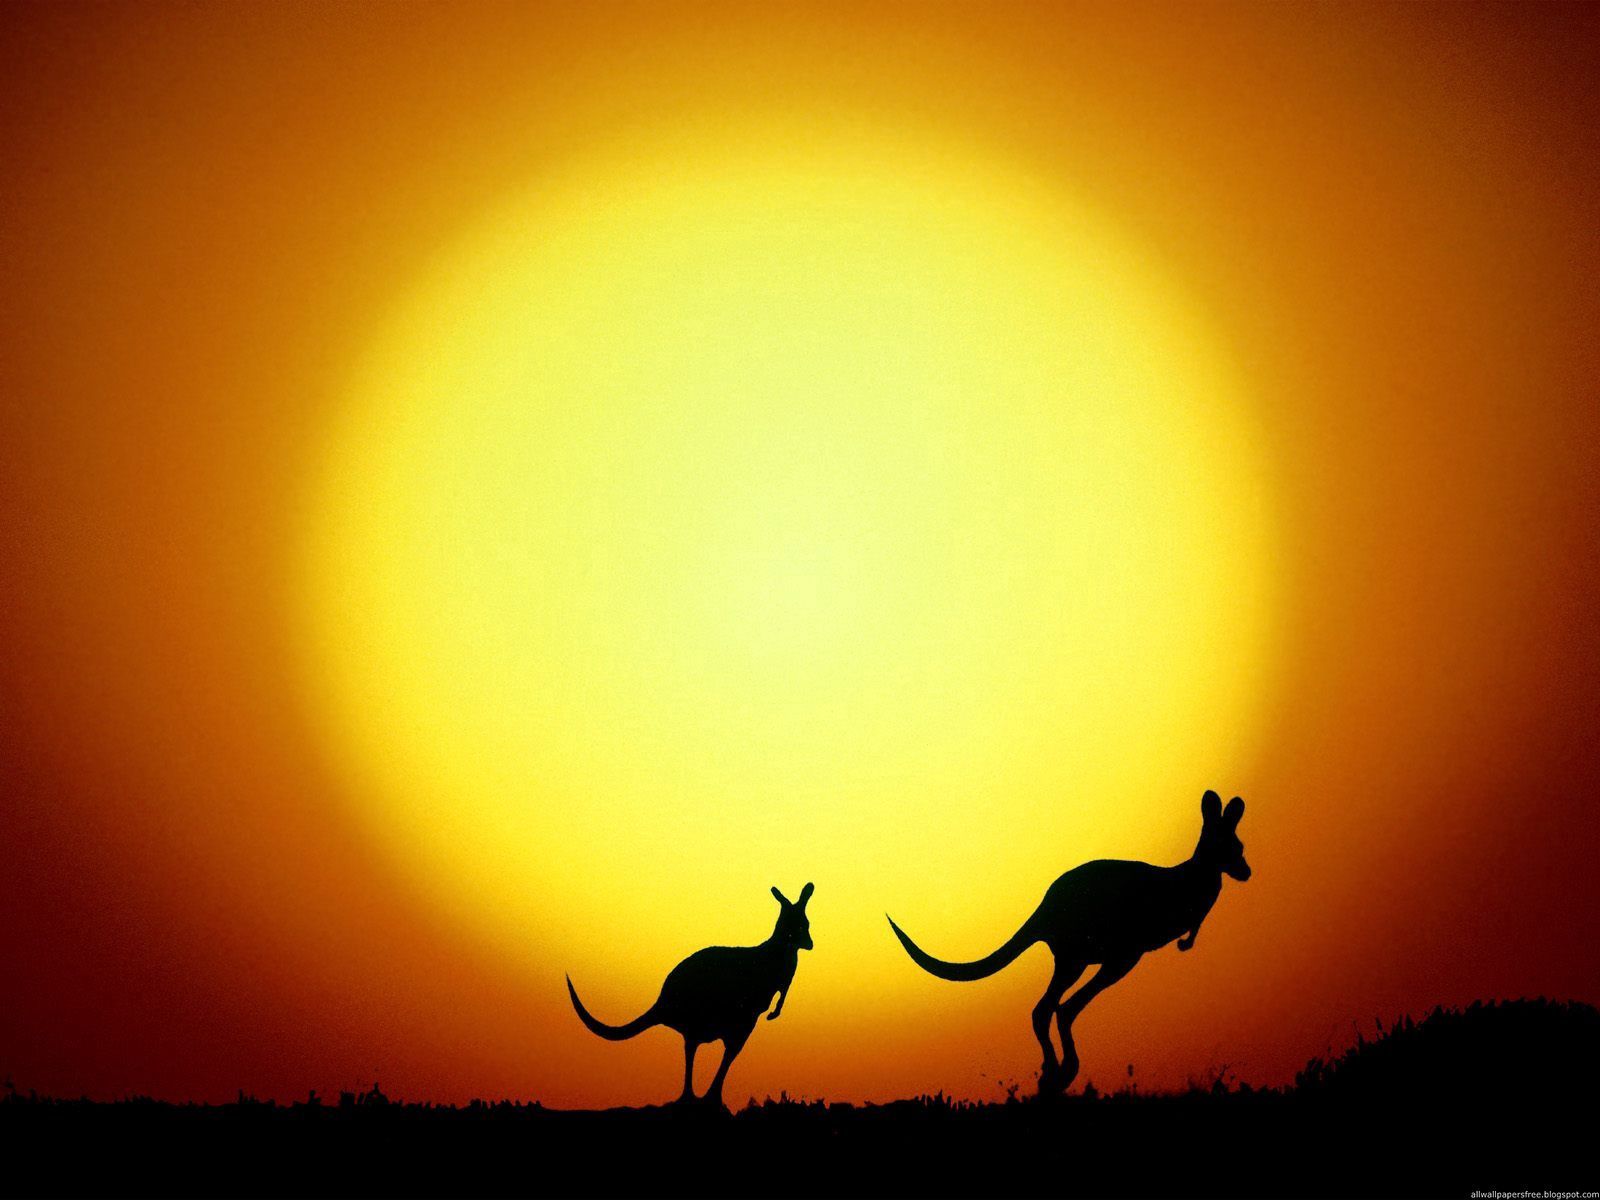 70252 download wallpaper nature, sunset, kangaroo, silhouettes, evening, australia screensavers and pictures for free